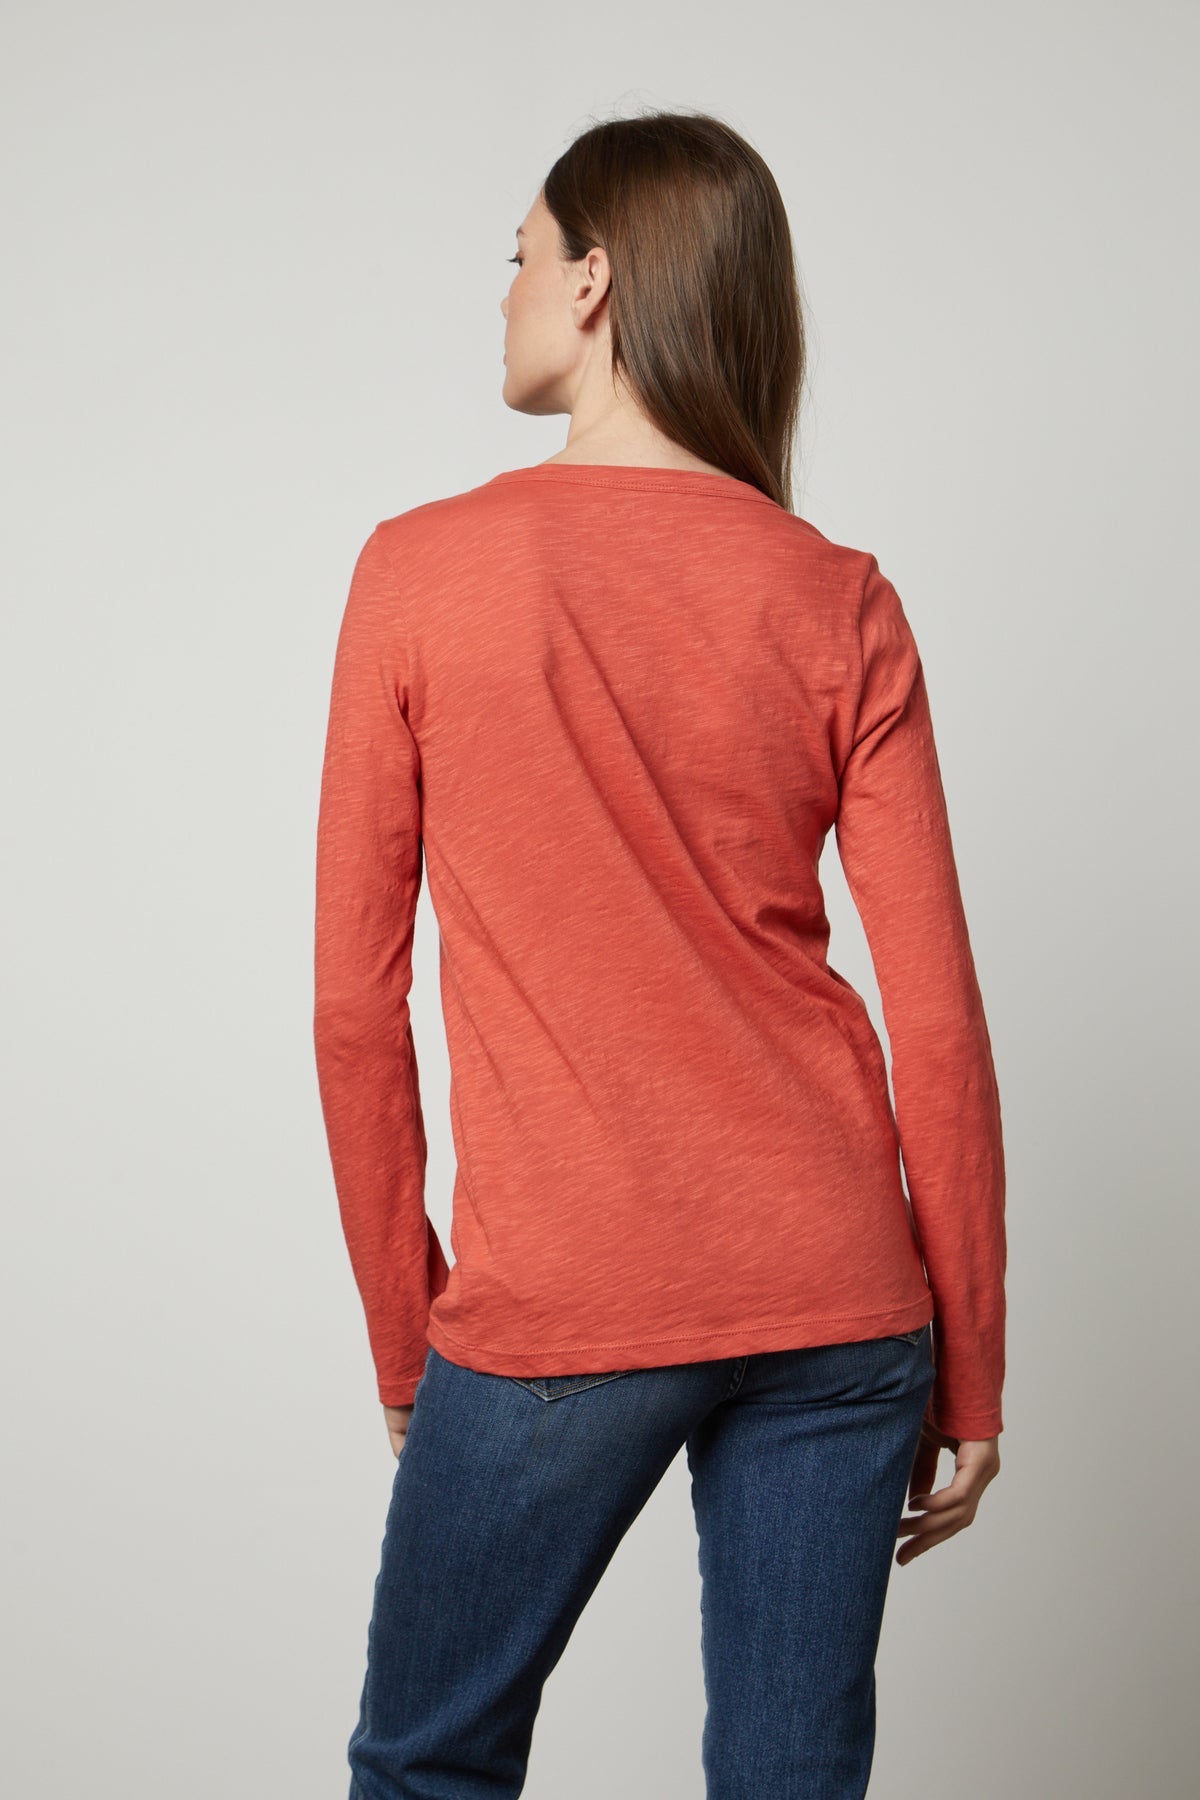   The back view of a woman wearing an orange LIZZIE ORIGINAL SLUB LONG SLEEVE TEE made by Velvet by Graham & Spencer. 